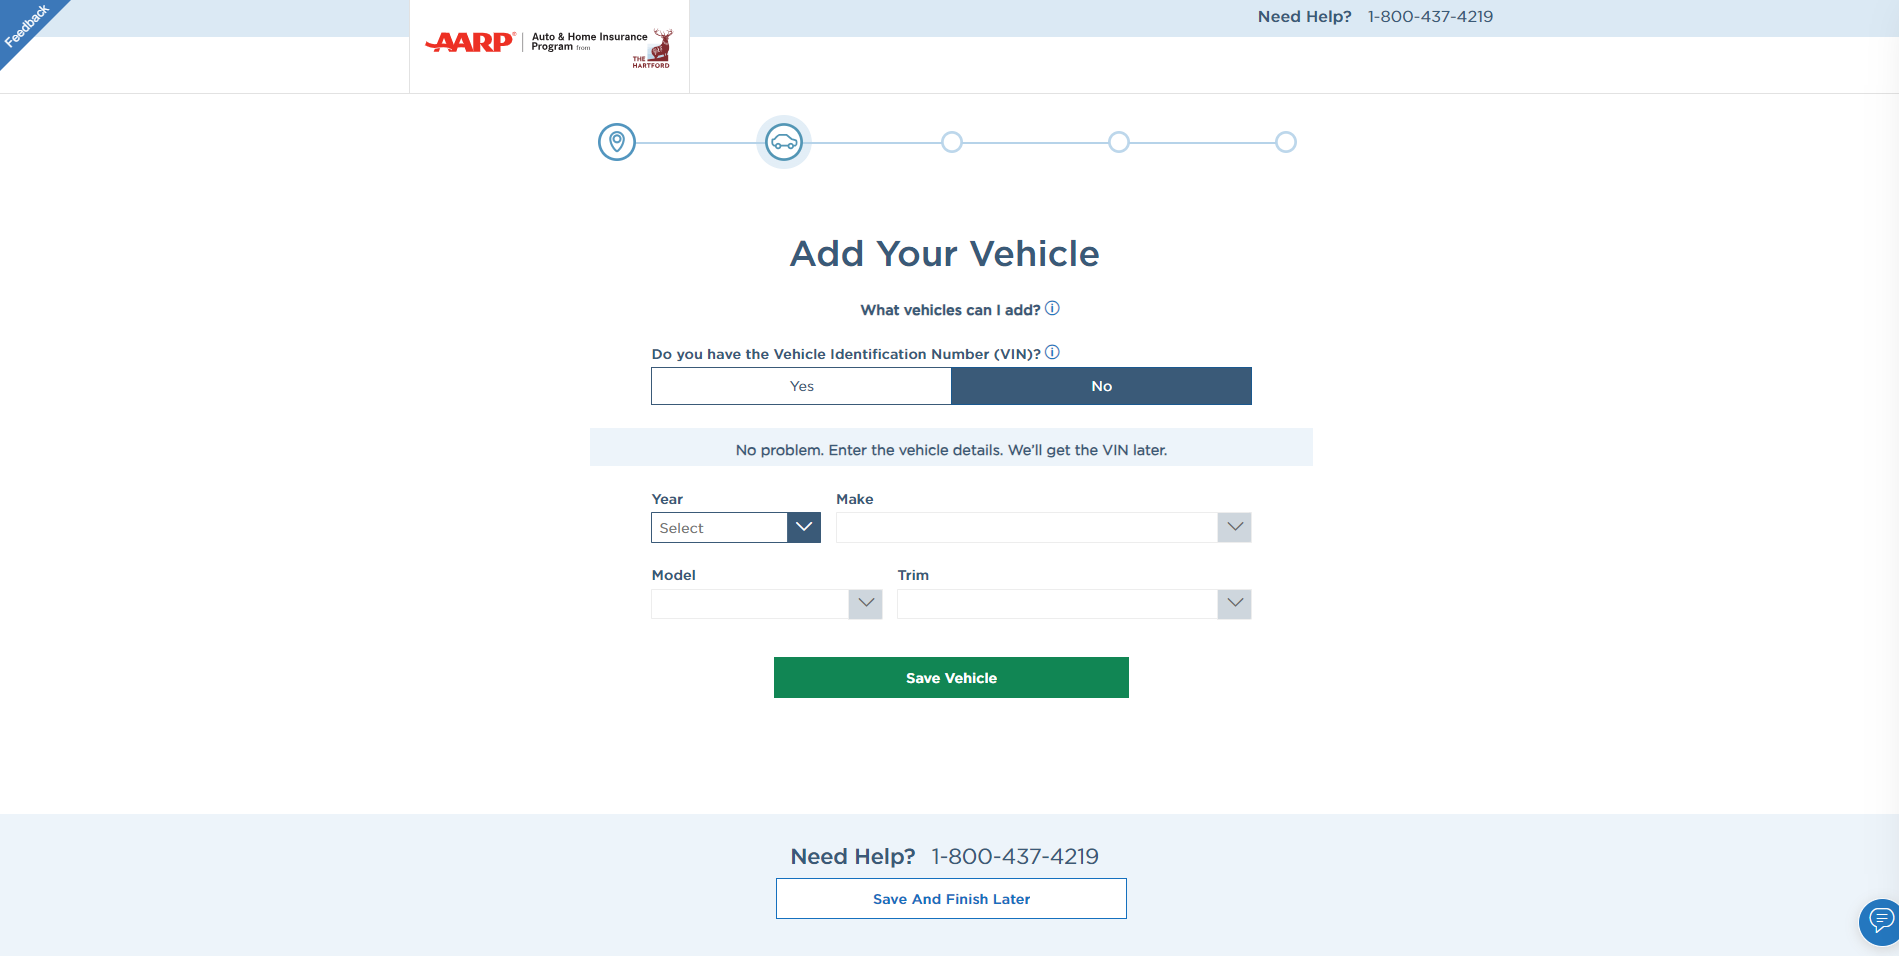 The Hartford quote page requesting additional vehicle information